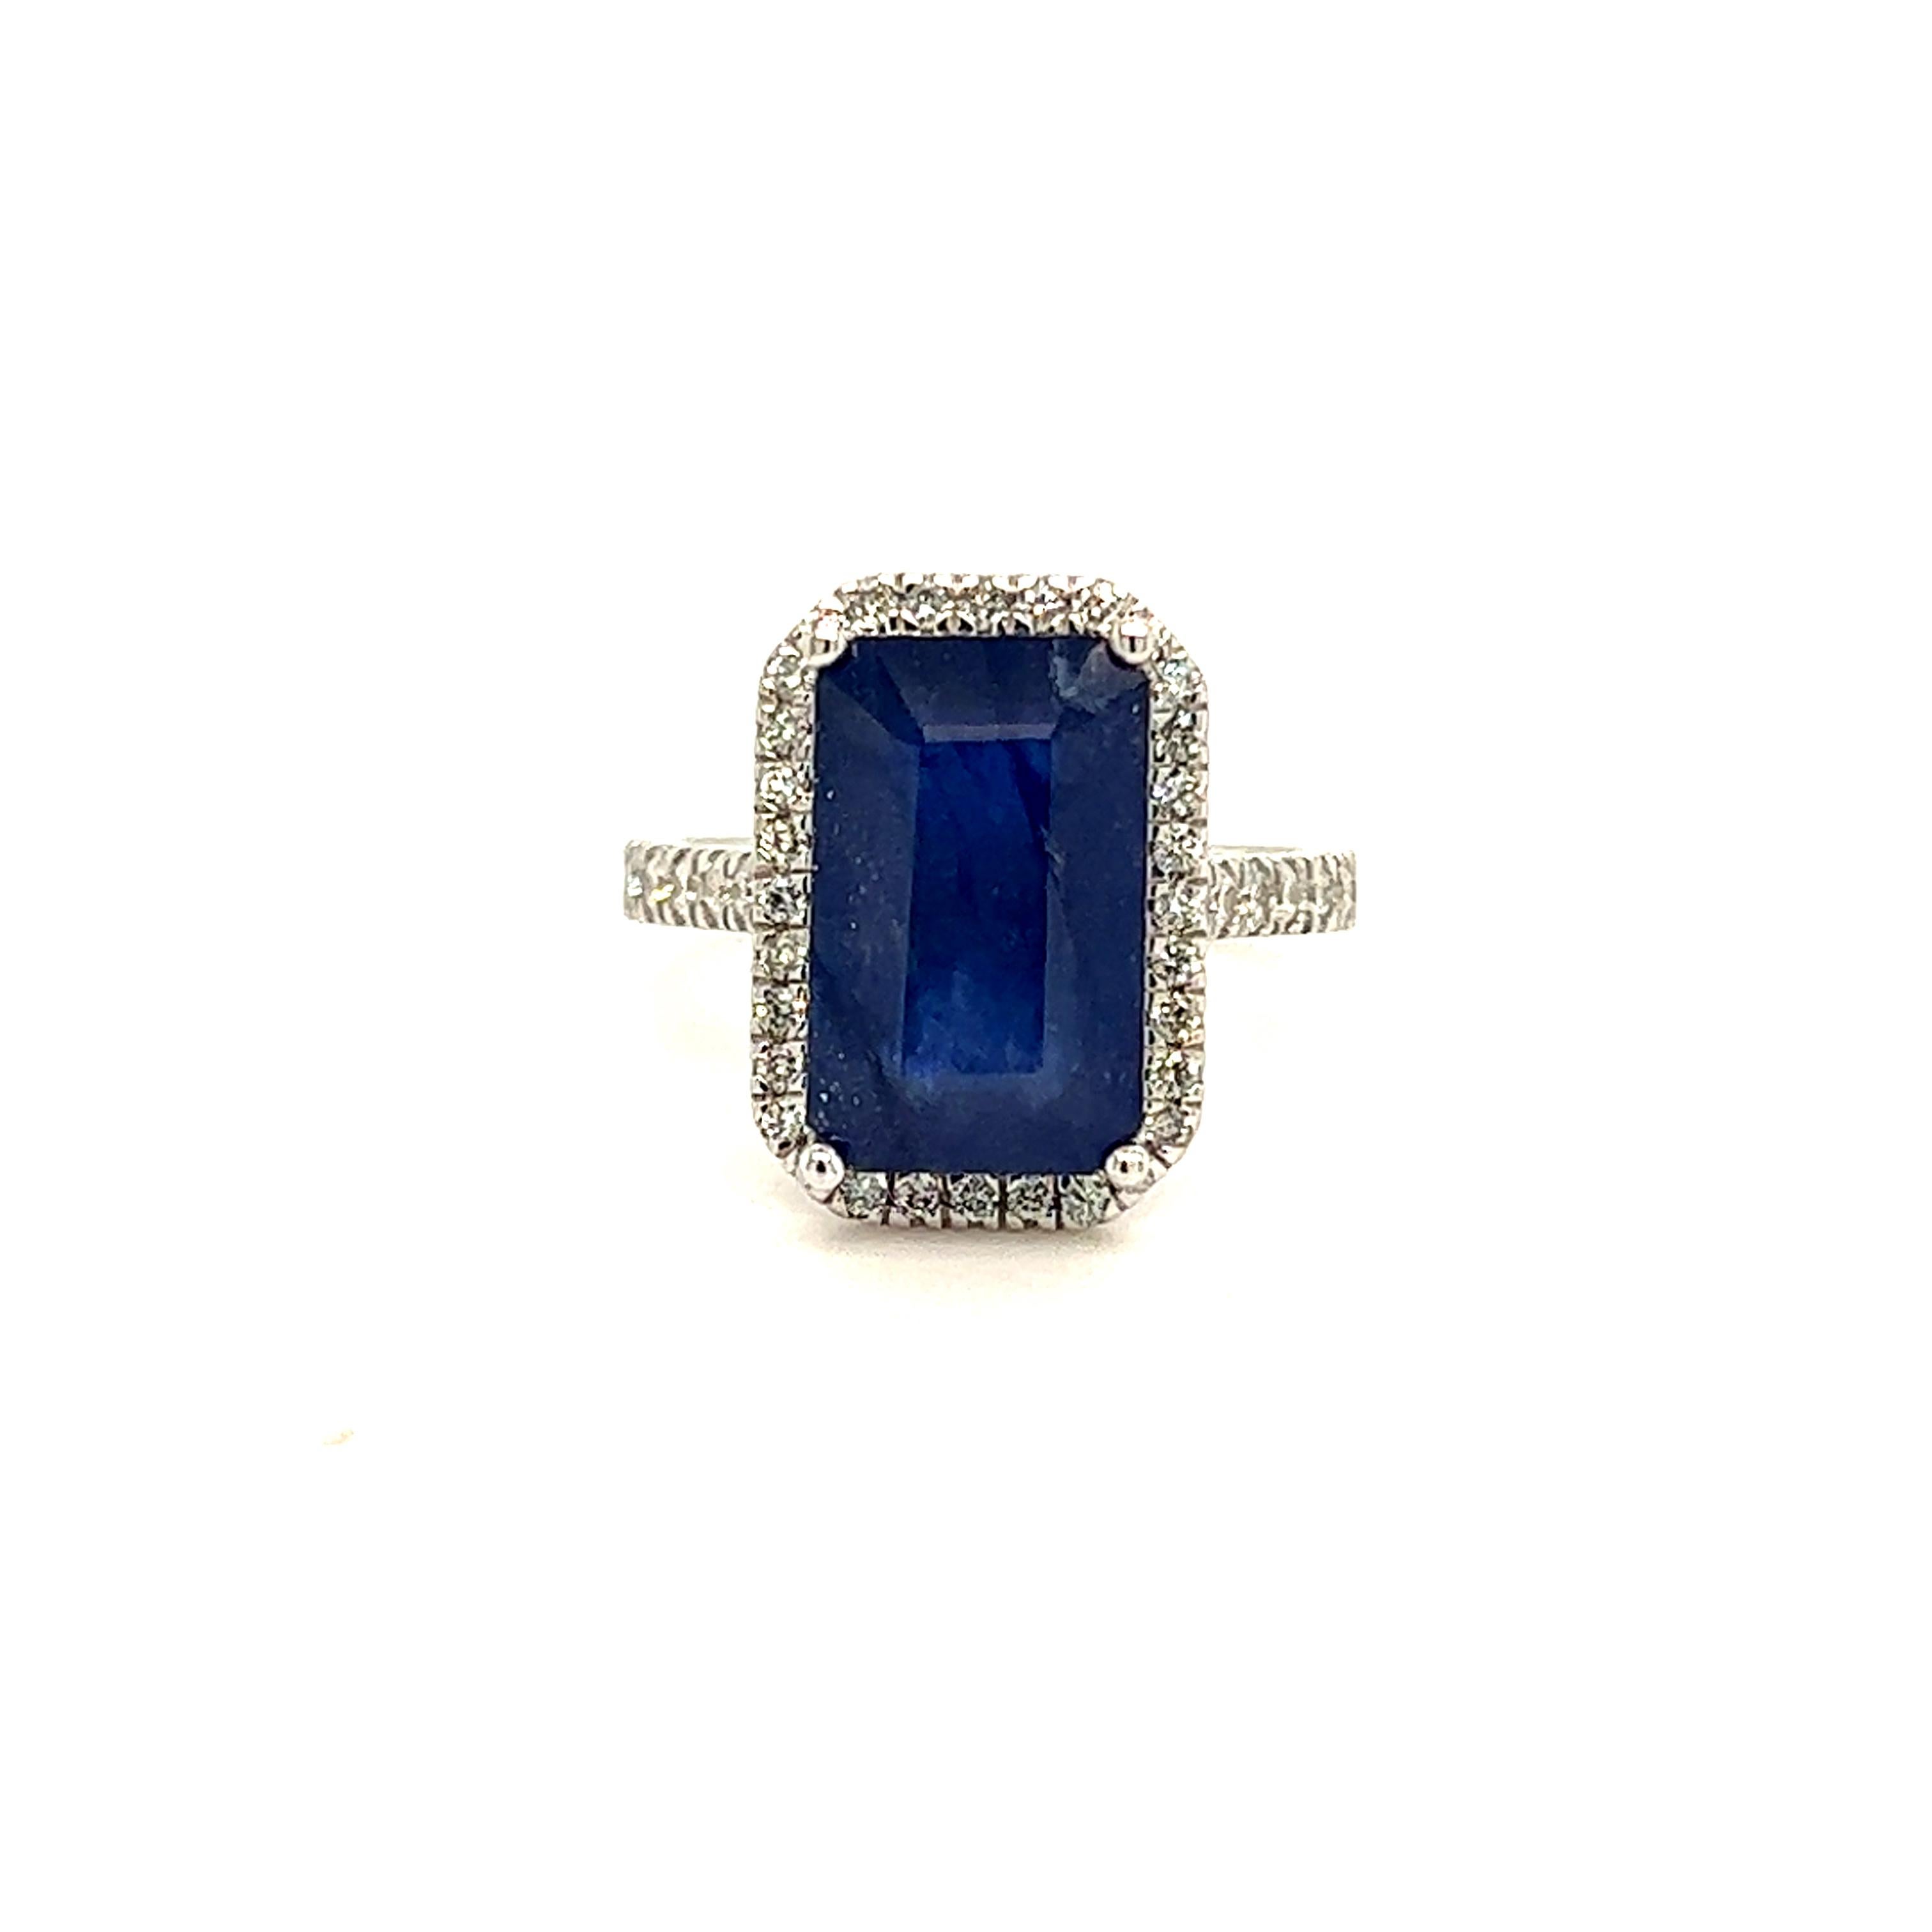 Sapphire Diamond Ring Size 6.25 14k Gold 6.84 TCW Certified For Sale 2